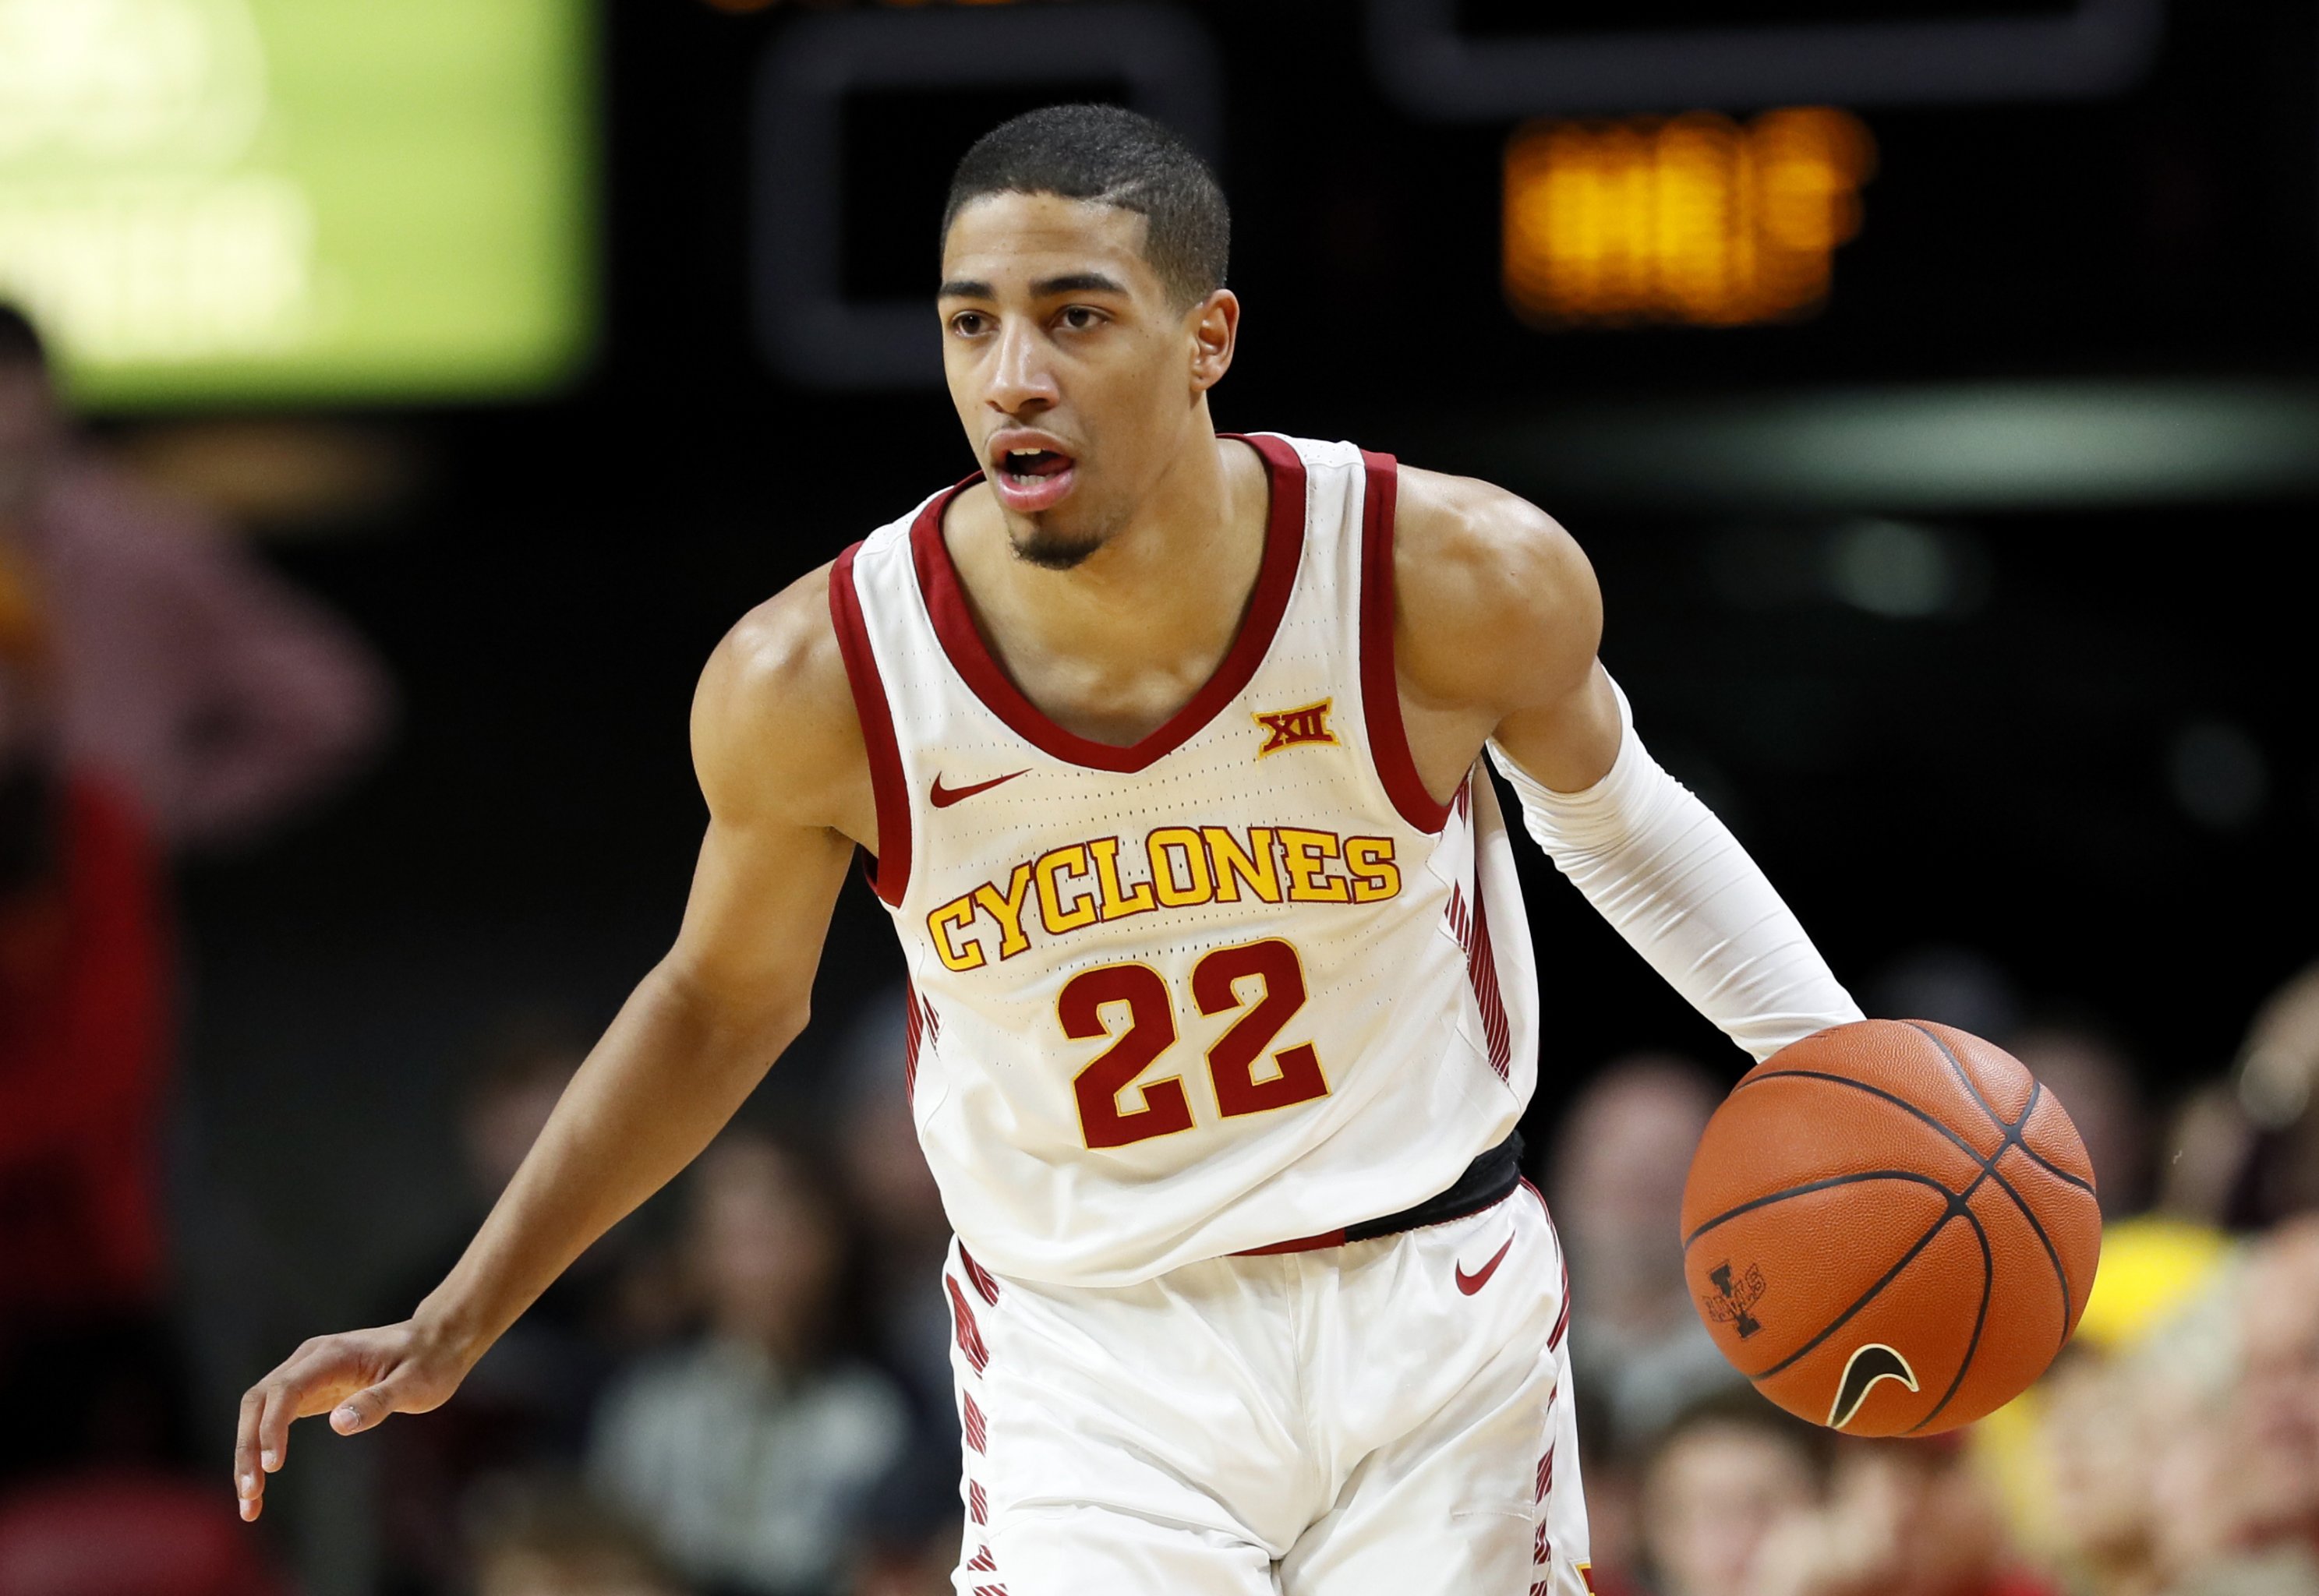 2020 Nba Draft Historical And Current Pro Comparisons For Projected Top Picks Bleacher Report Latest News Videos And Highlights